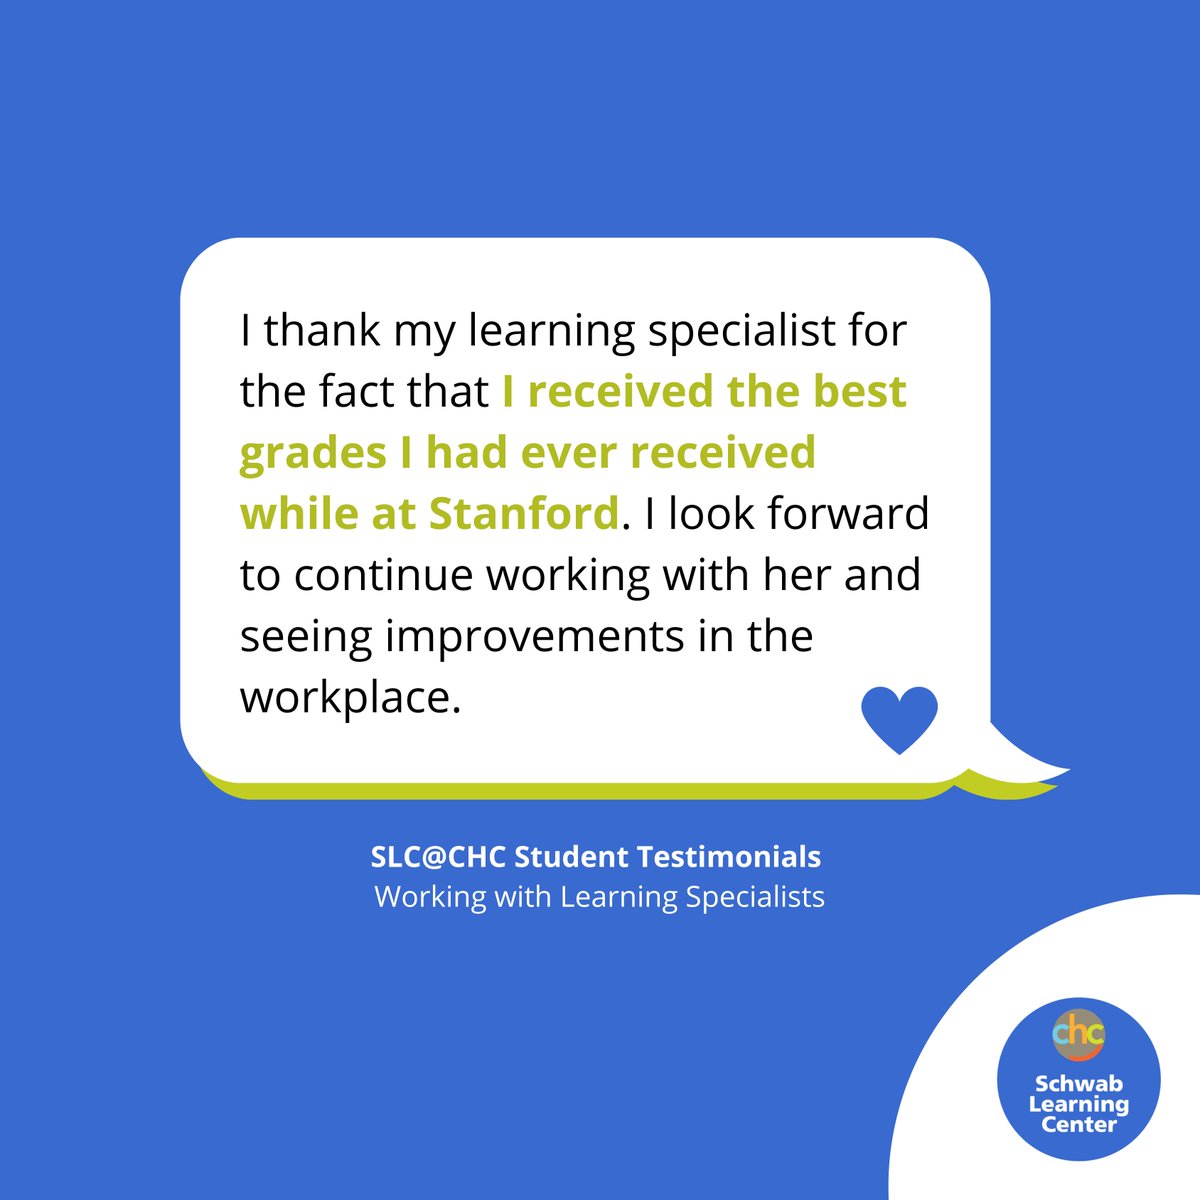 Have a #learningdisability? 

Tap into your gifts, strengths and potential by working with one of our #learningspecialists, and reach new heights! ⛰️

Visit us at chconline.org/slc

#SchwabLearningCenteratCHC #CHC #StudentTestimonial #LearningDisabilities #ADHD #Dyslexia